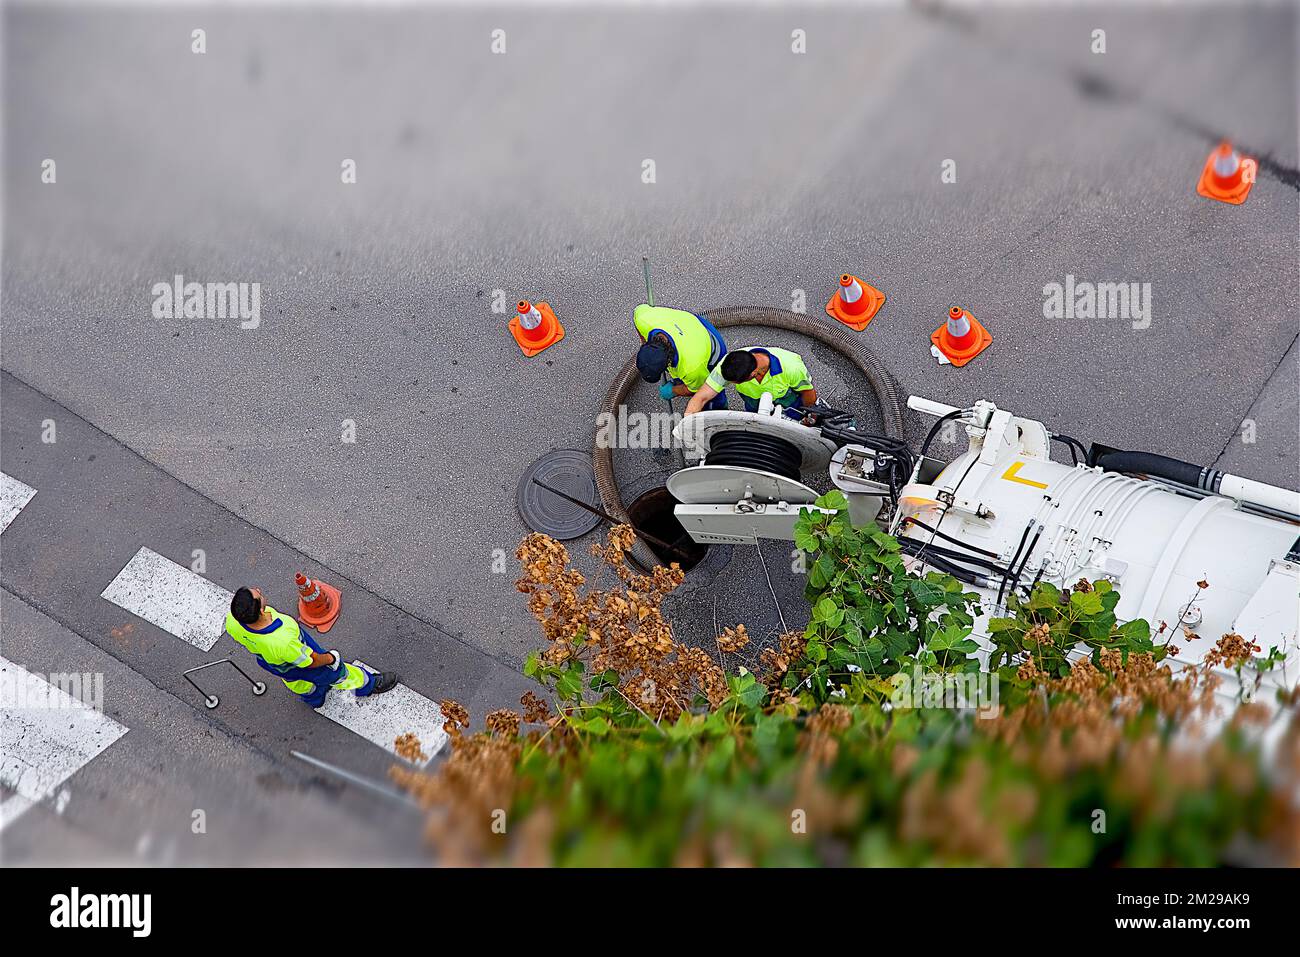 Sewers cleaning | Nettoyage des égouts 31/08/2017 Stock Photo